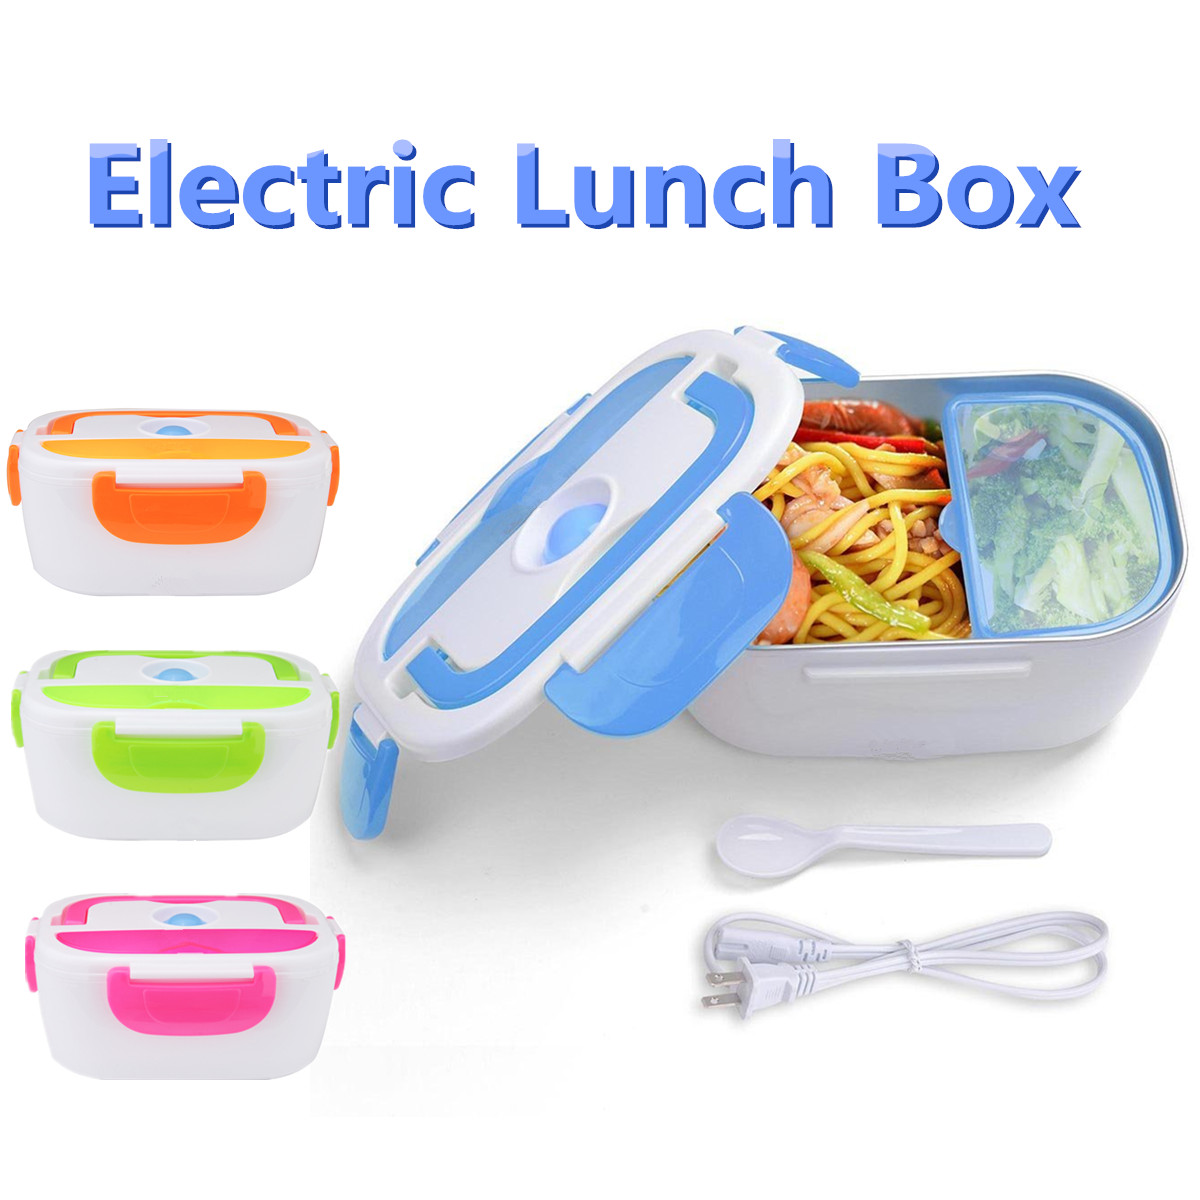 electric lunch box review singapore